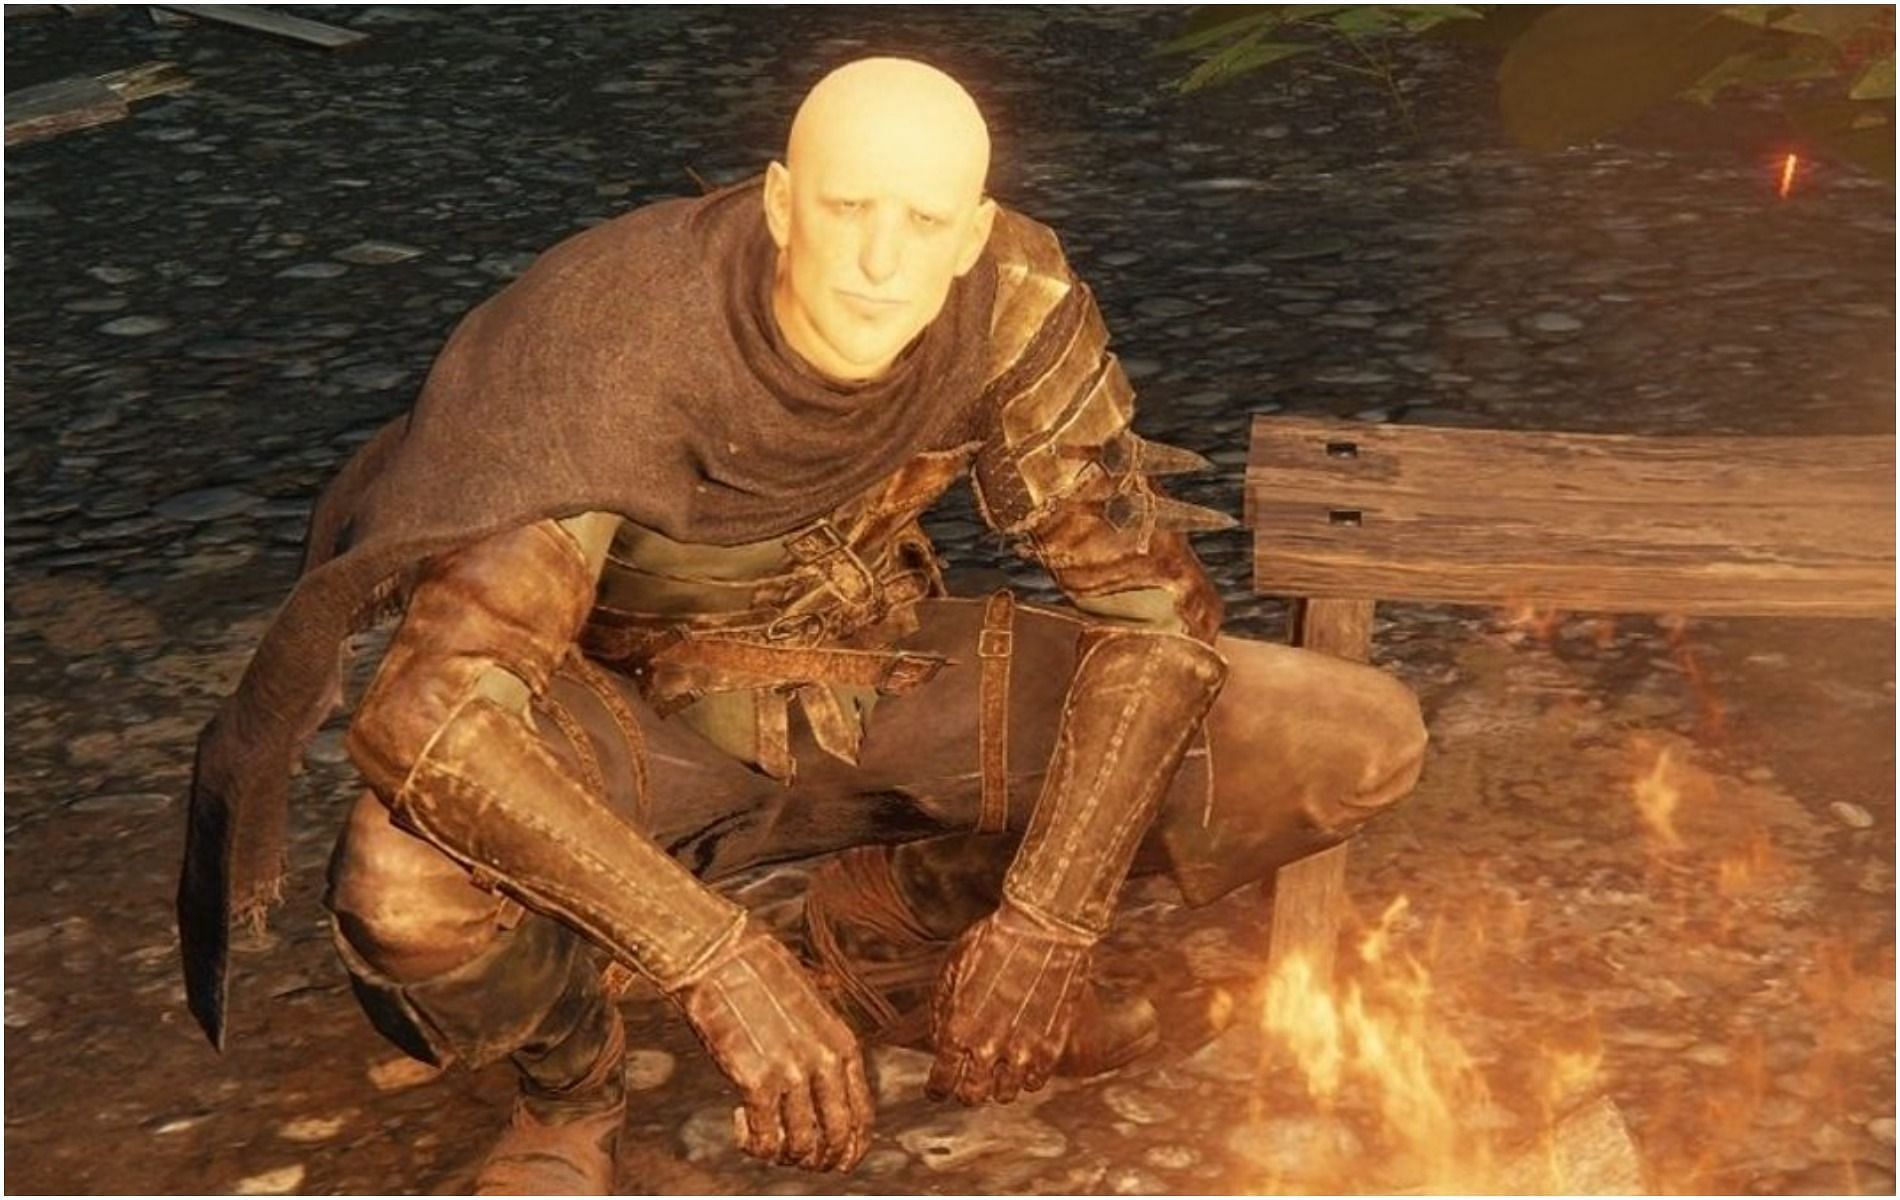 Patches as a merchant in Elden Ring (Image via FromSoftware)